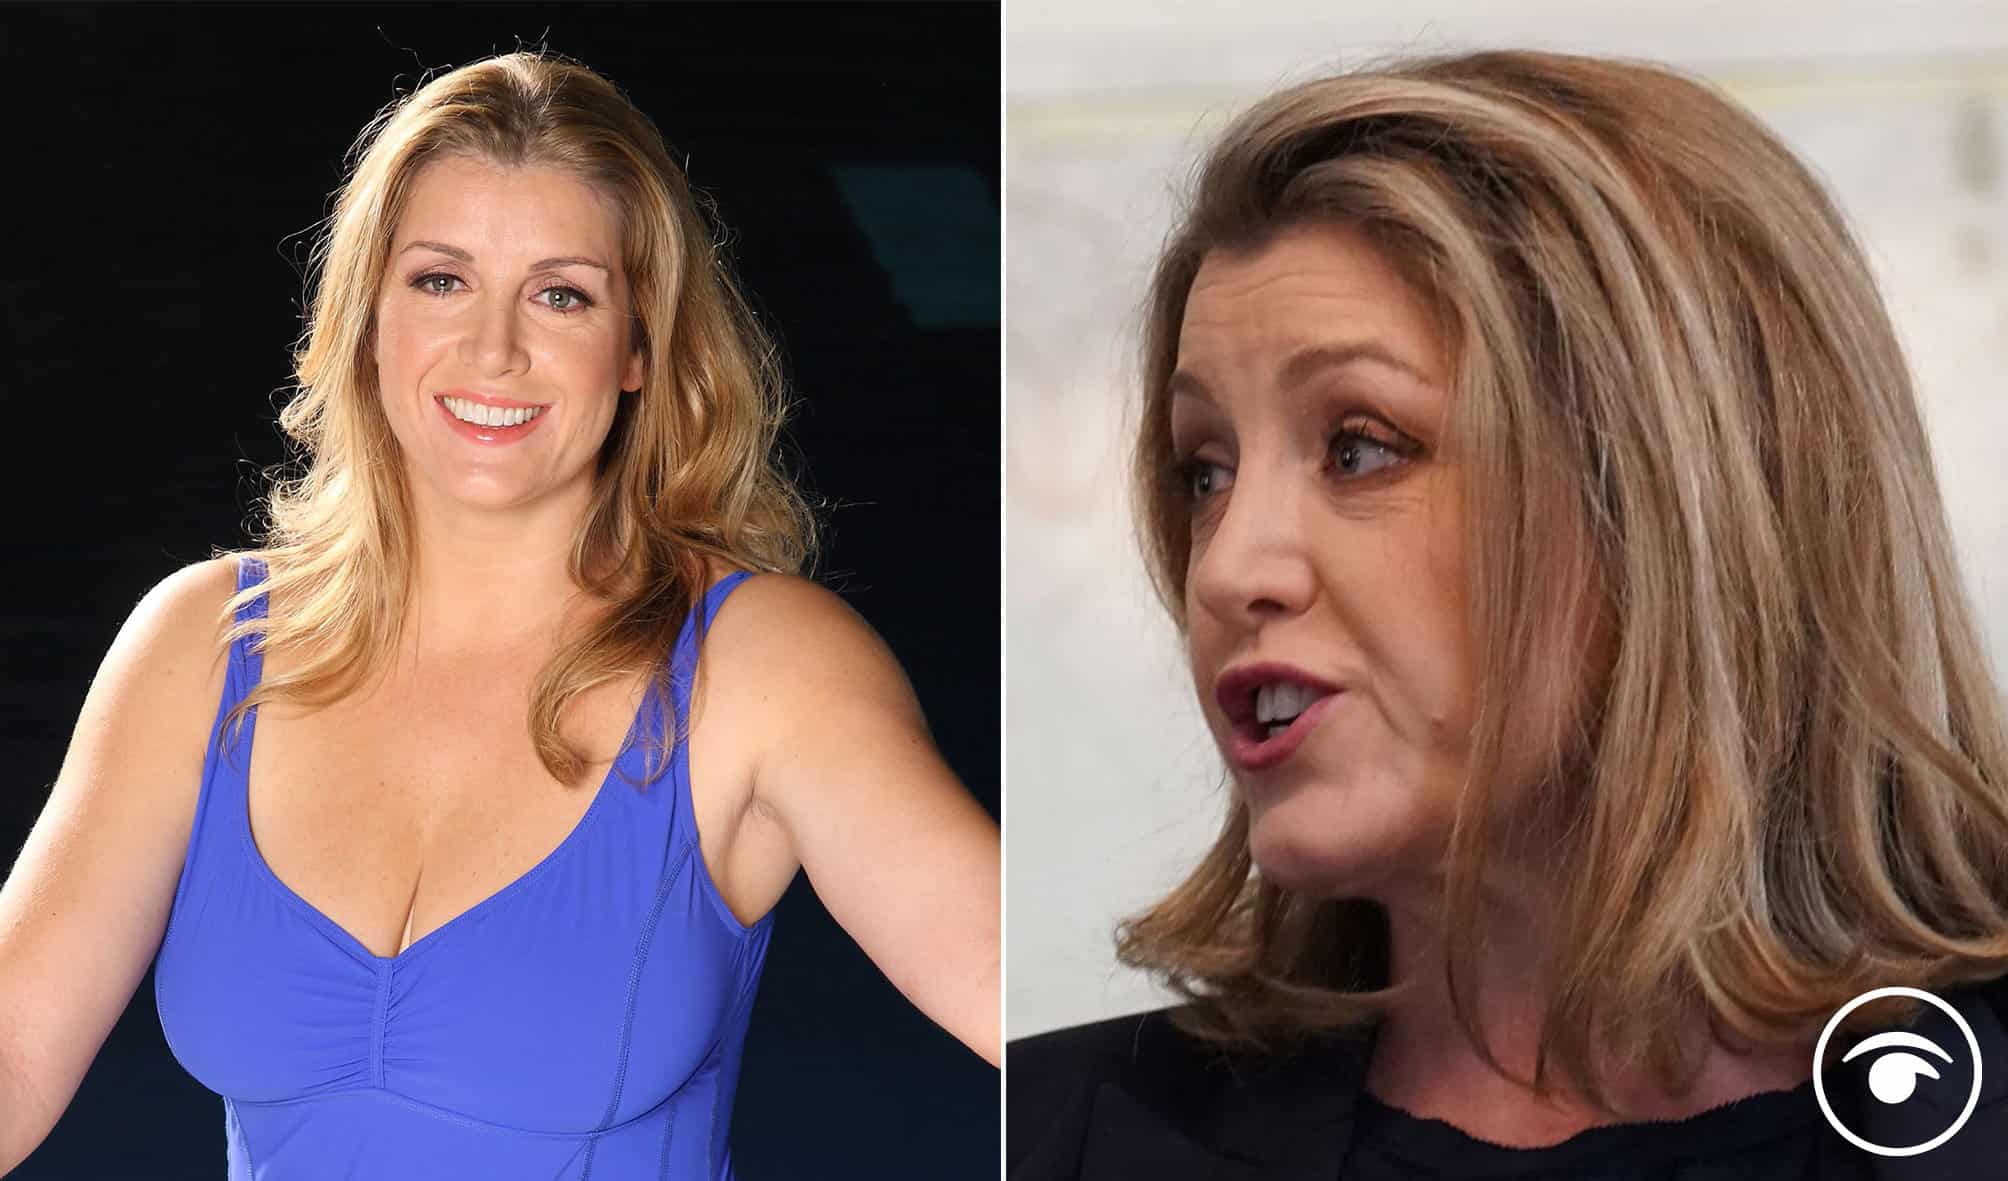 Watch: Penny Mordaunt’s televised belly flop resurfaces amid her race to become PM